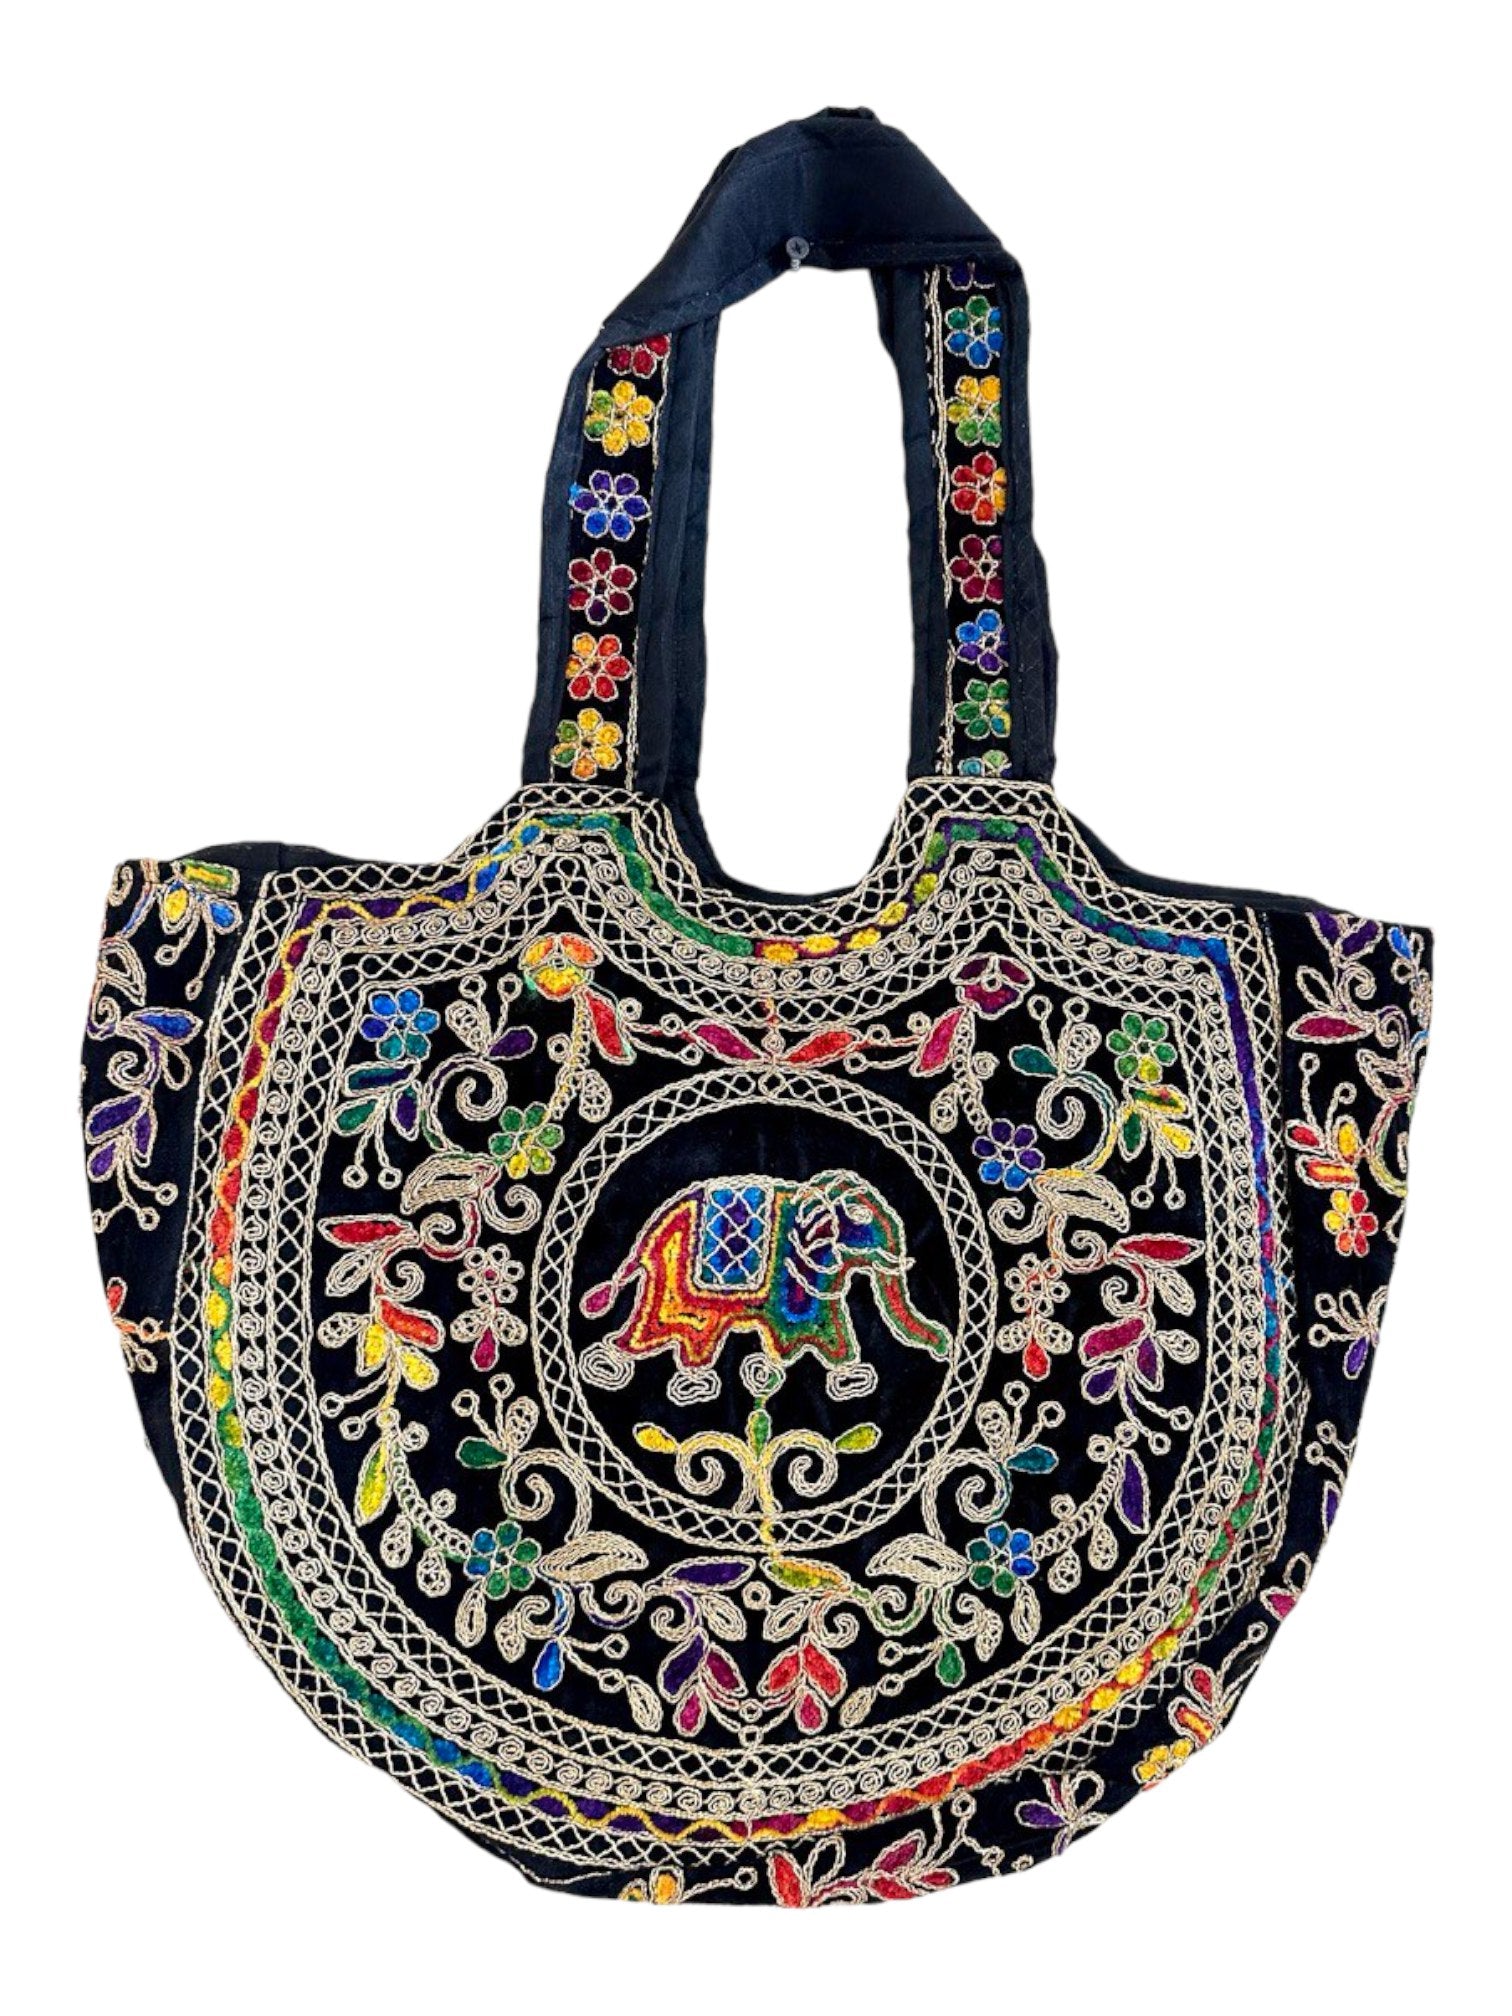 Craft Trade Embroidered Sling Bag Rajasthani Handmade Designer Purse/Crossbody  Bag for Women's and Girls (Cream) | Leather bags handmade, Bags, Purses and  bags